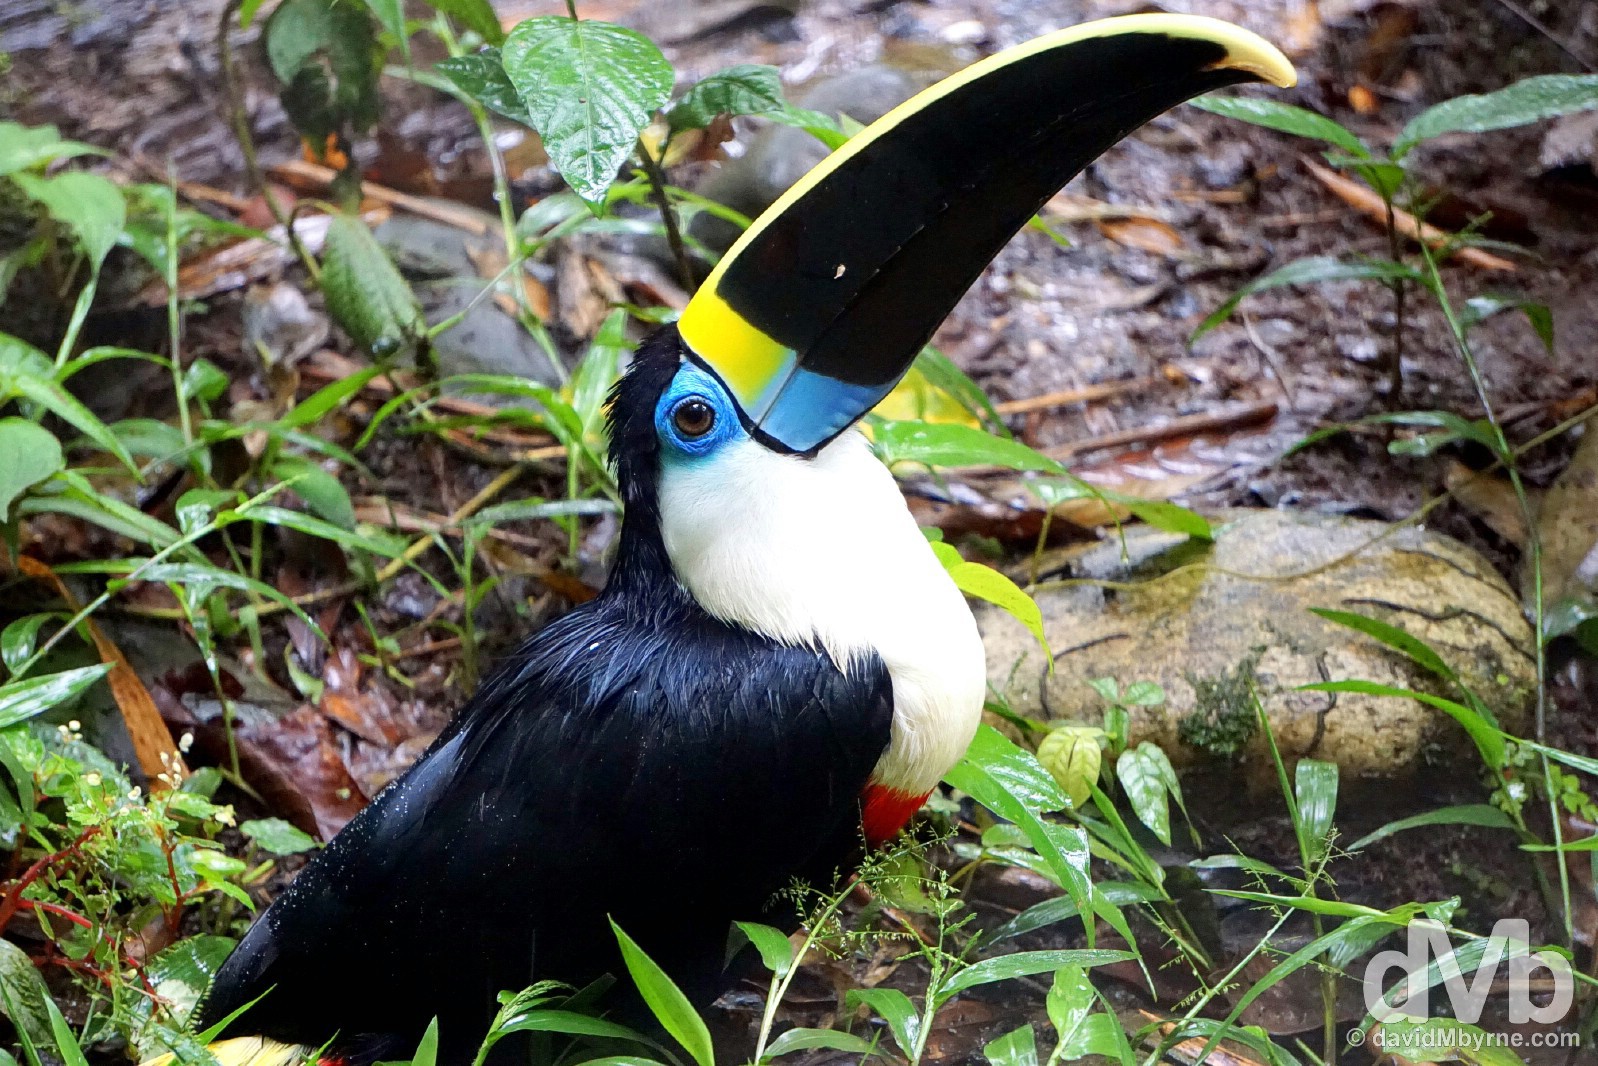 A Toucan in the AmaZOOnico Animal Reserve in the rain forest of Ecuador. July 12, 2015.